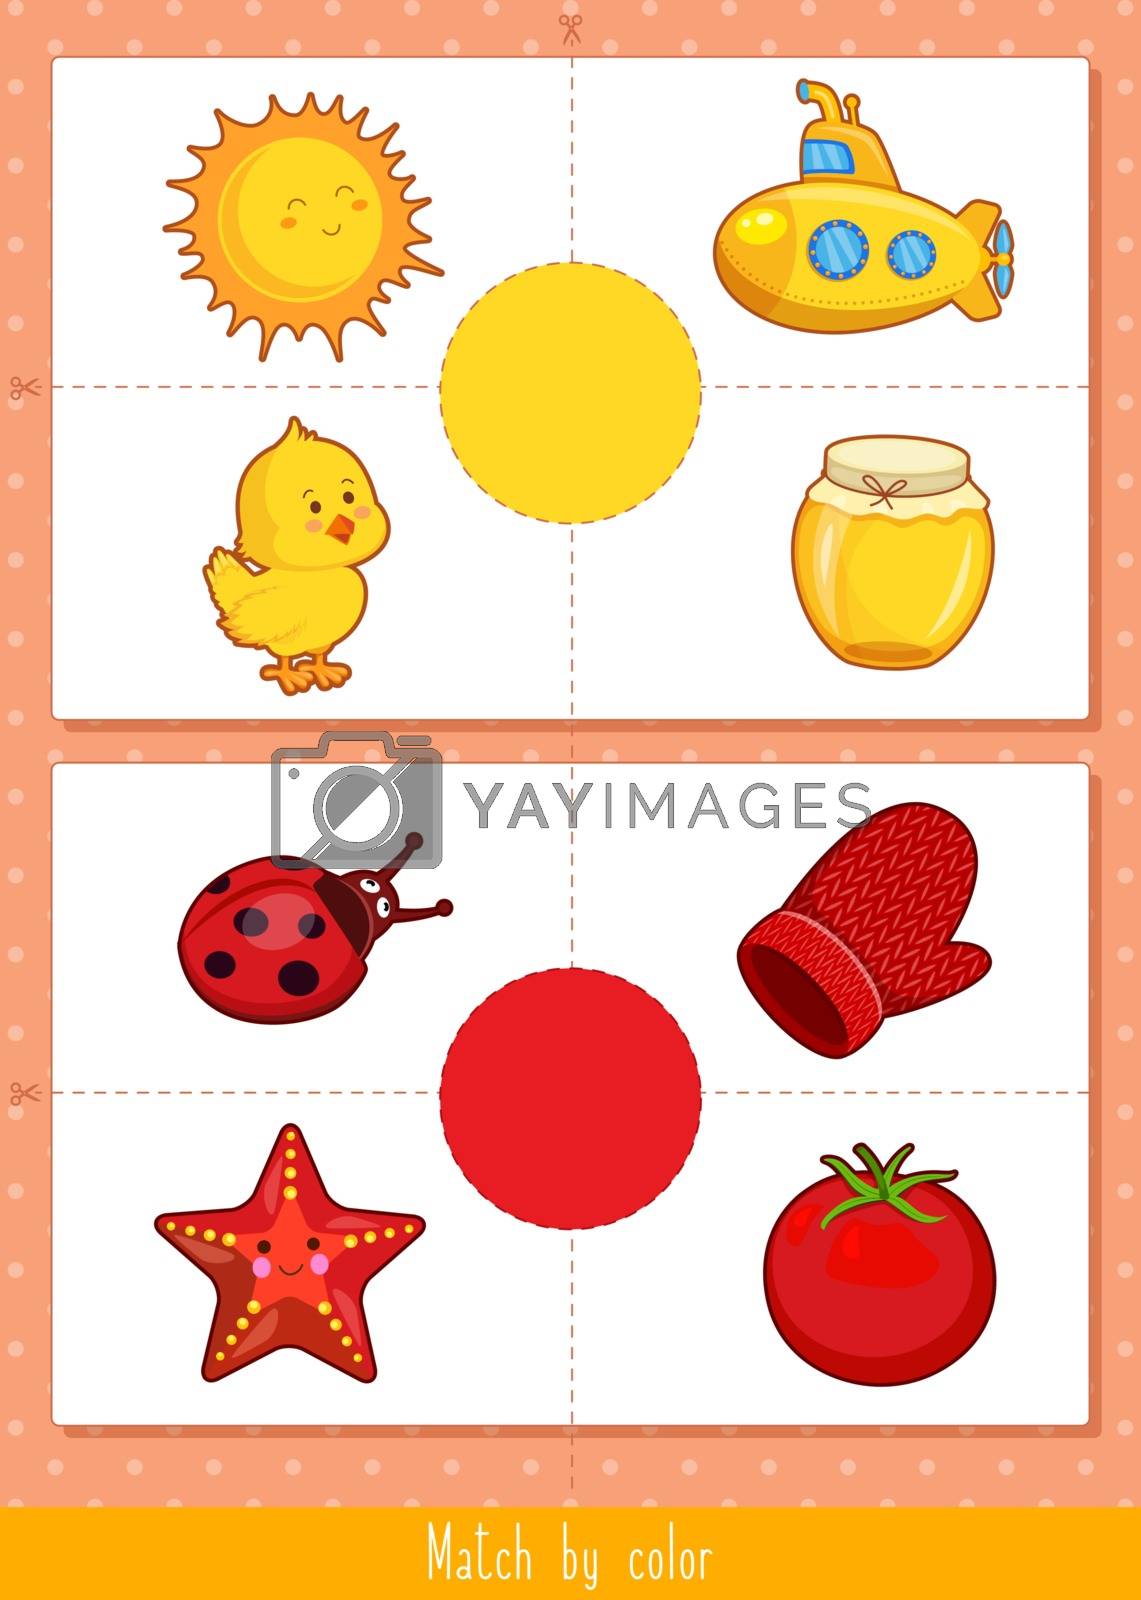 Toddlers activity, educational children game, vector illustration